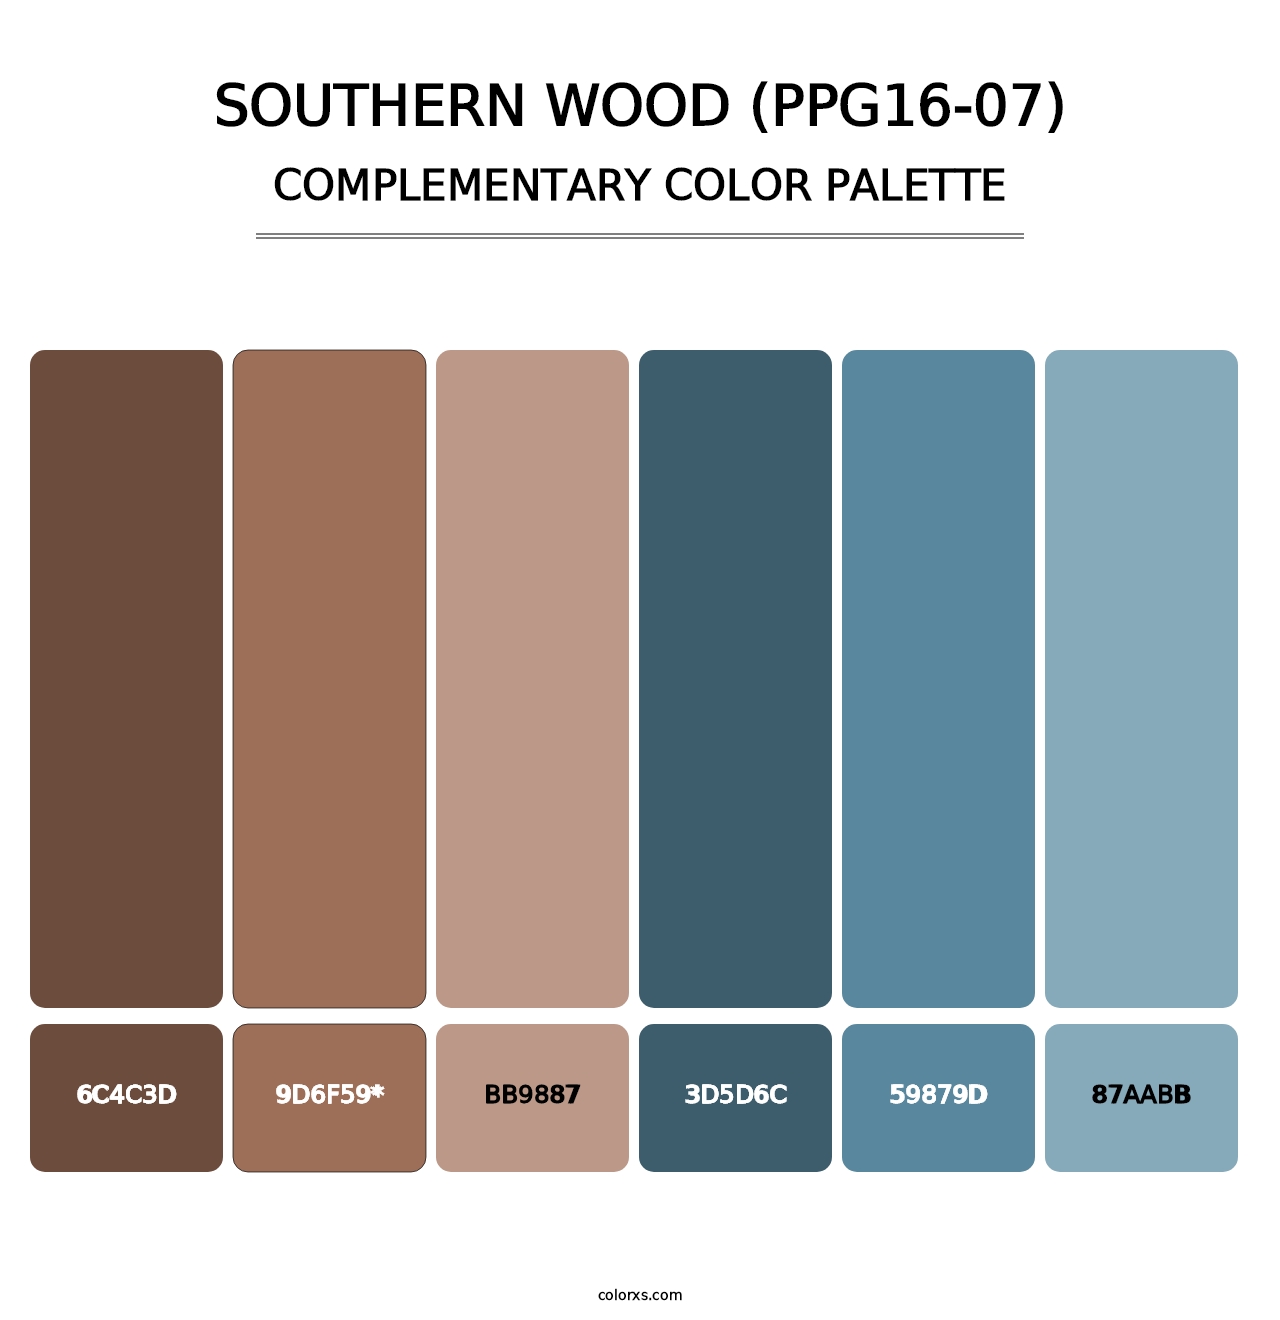 Southern Wood (PPG16-07) - Complementary Color Palette